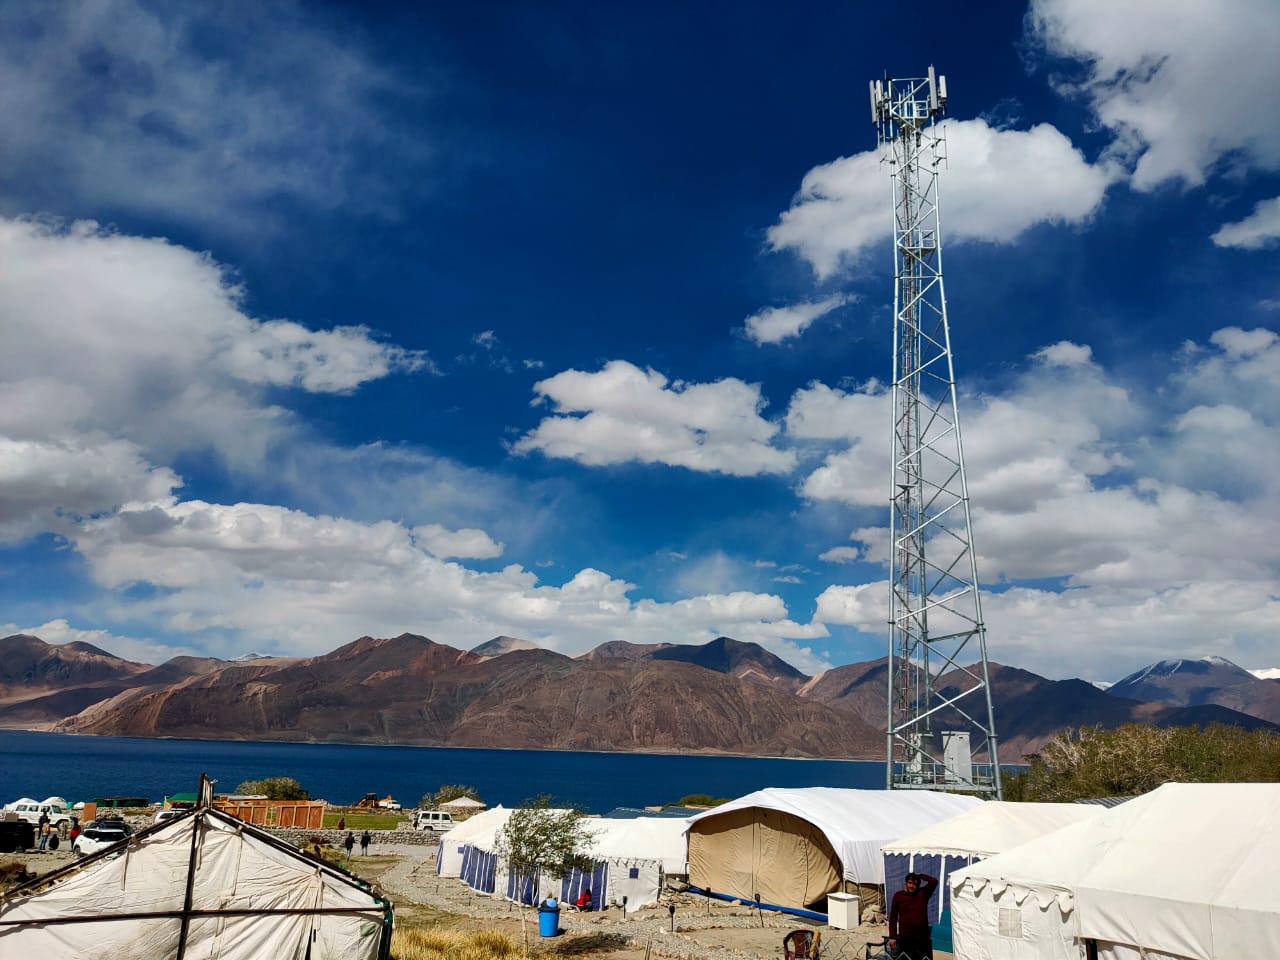 Jio expands 4G services in Ladakh region near Pangong lake decoding=